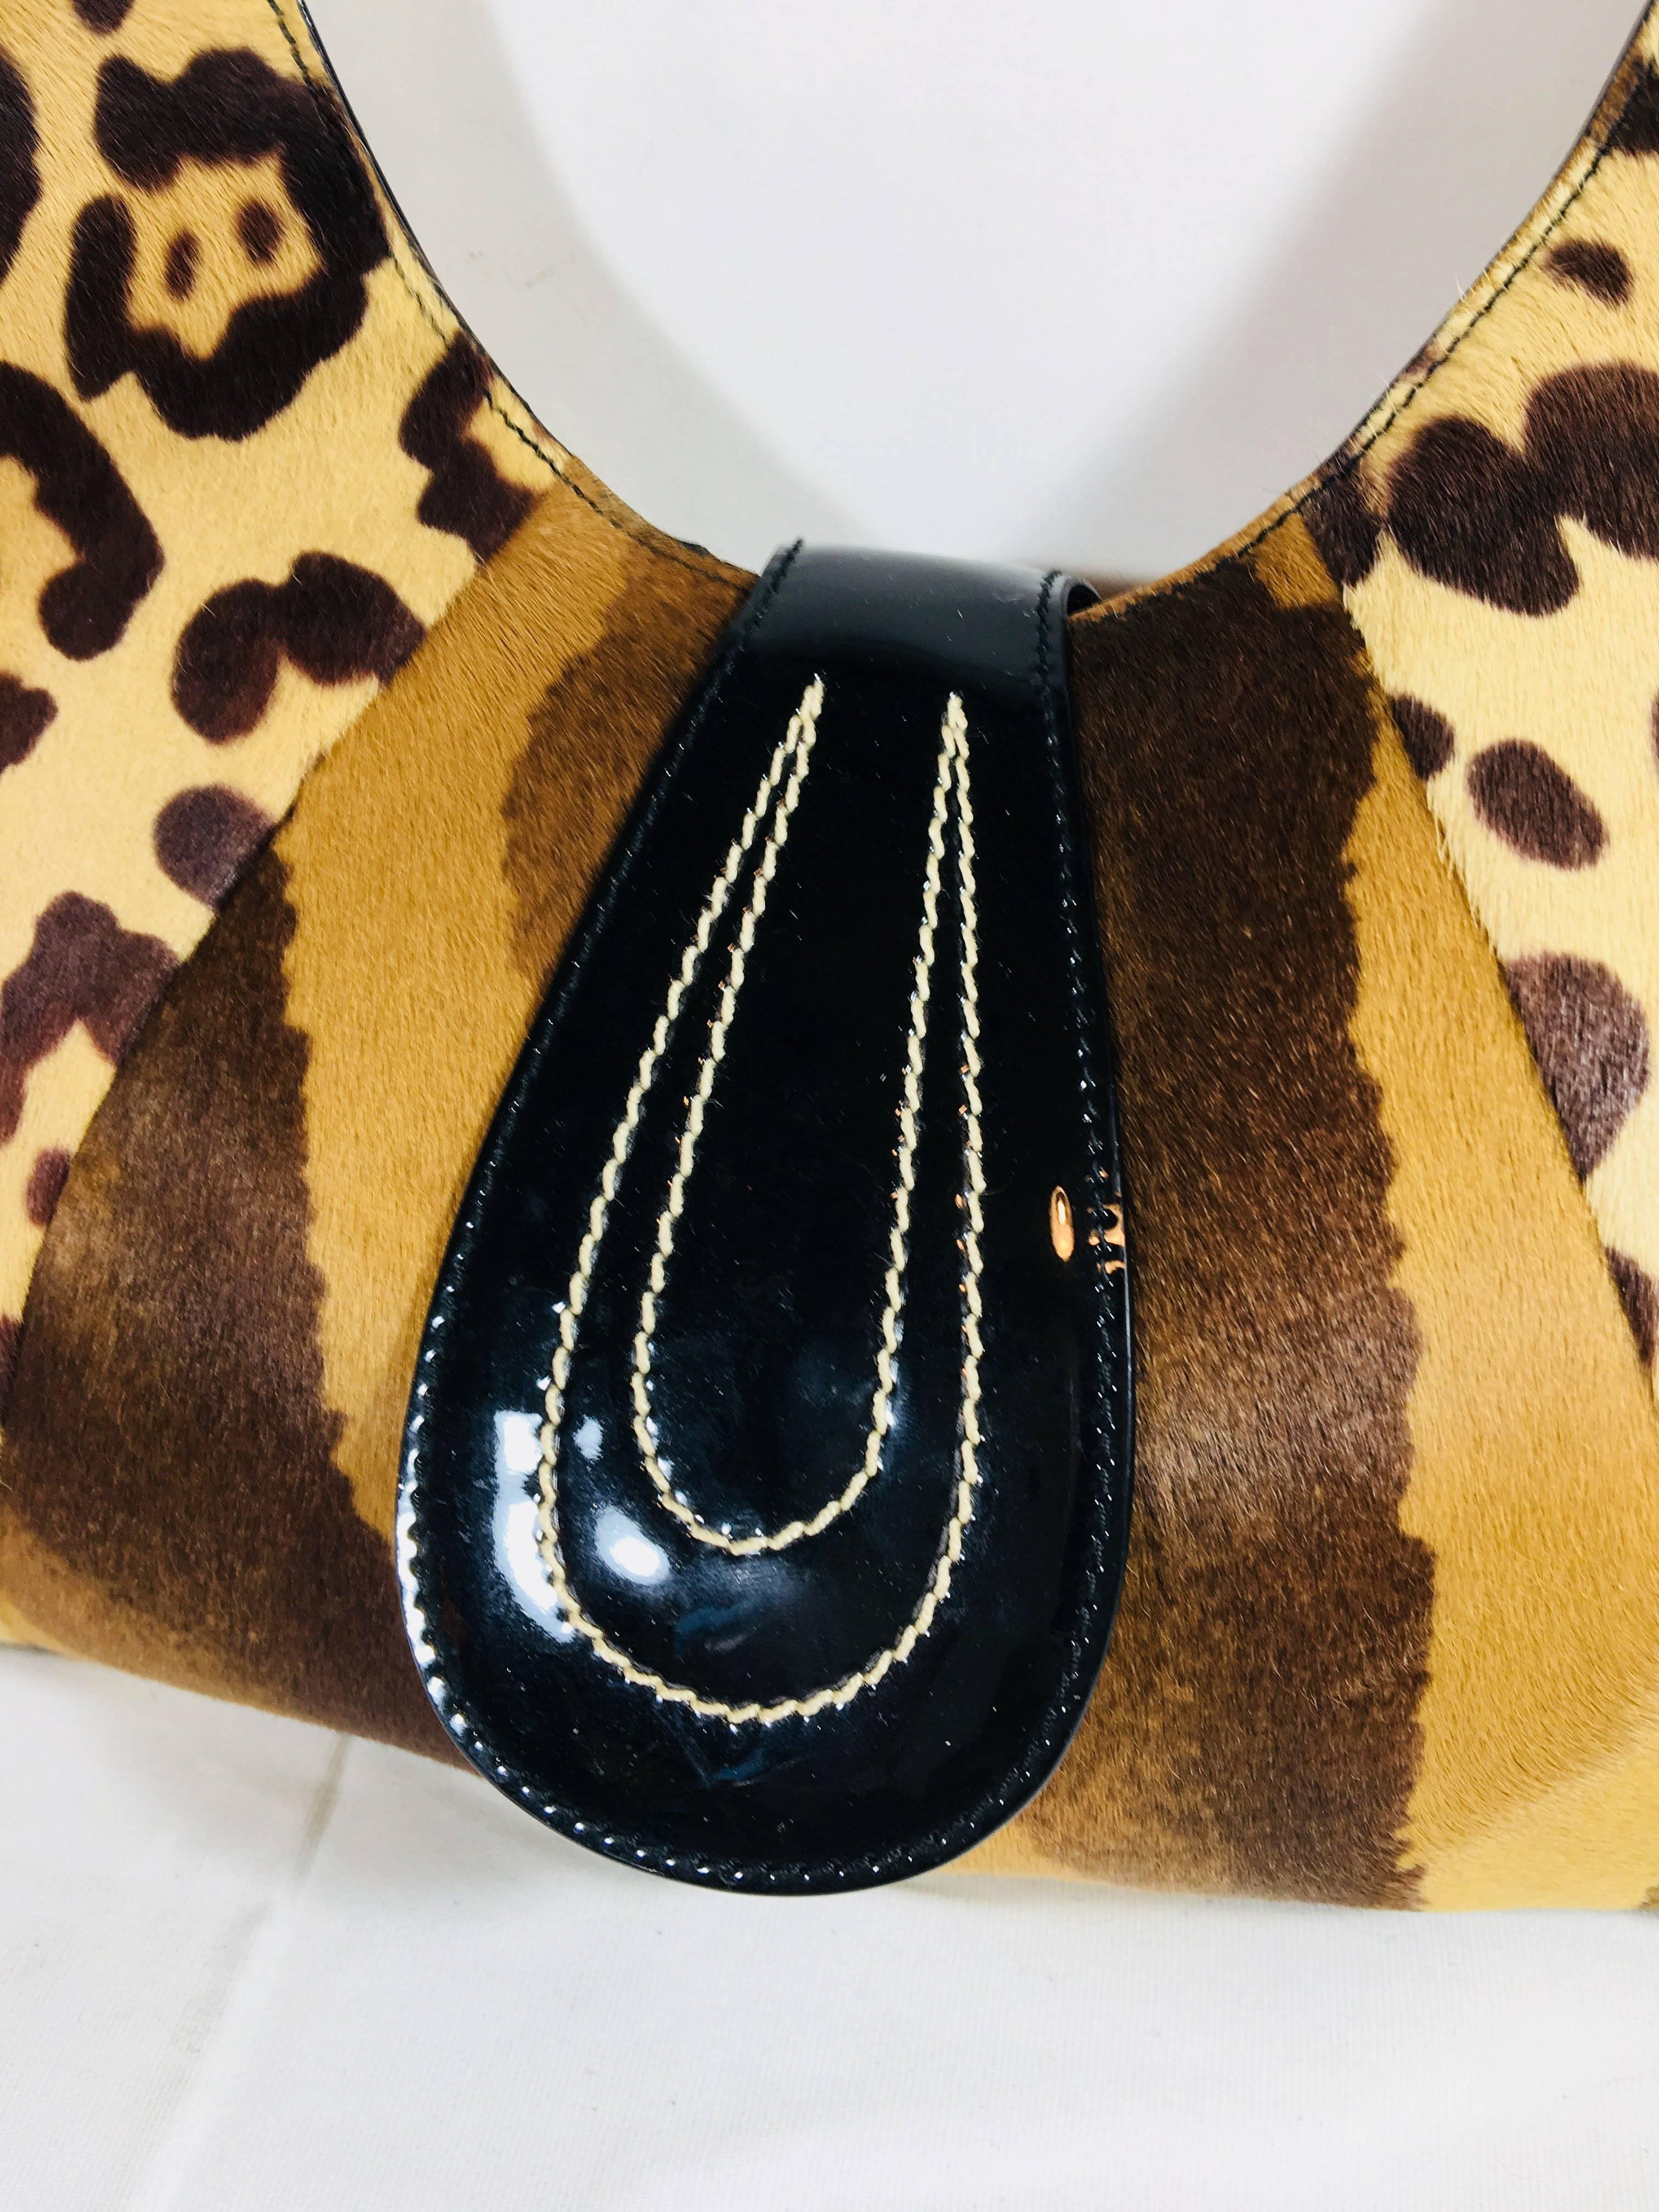 Emanuel Ungaro Animal Print Hobo Bag. Medium Sized Made of Pony Hair with Patent Leather Trim and Magnetic Closure.